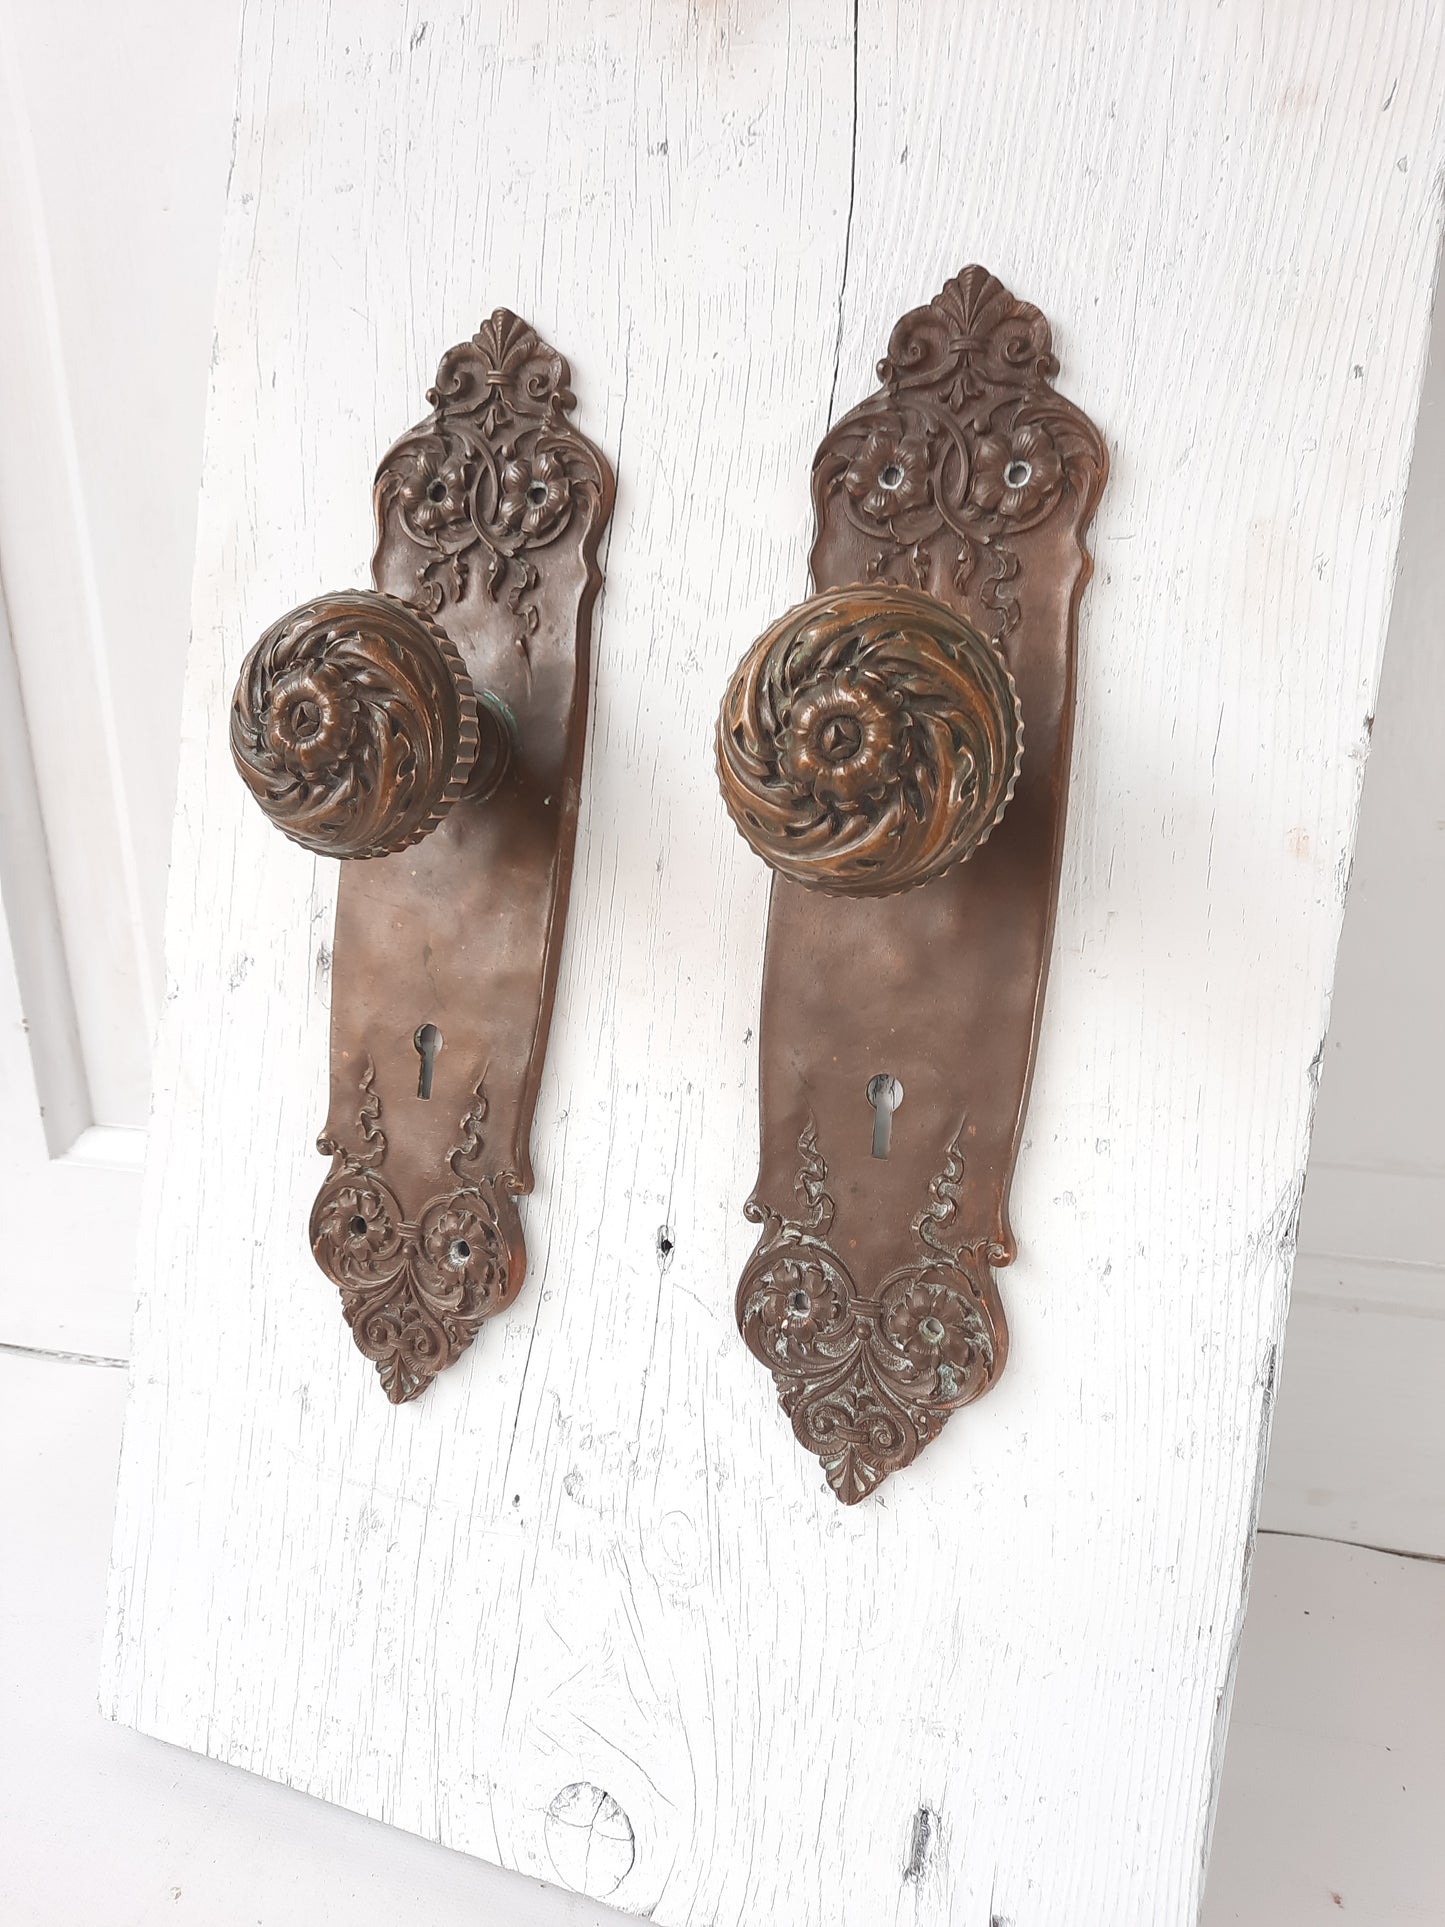 Urbino Pattern by Yale and Towne Antique Door Hardware, Antique Bronze Doorknobs and Backplates, Victorian Era 032603